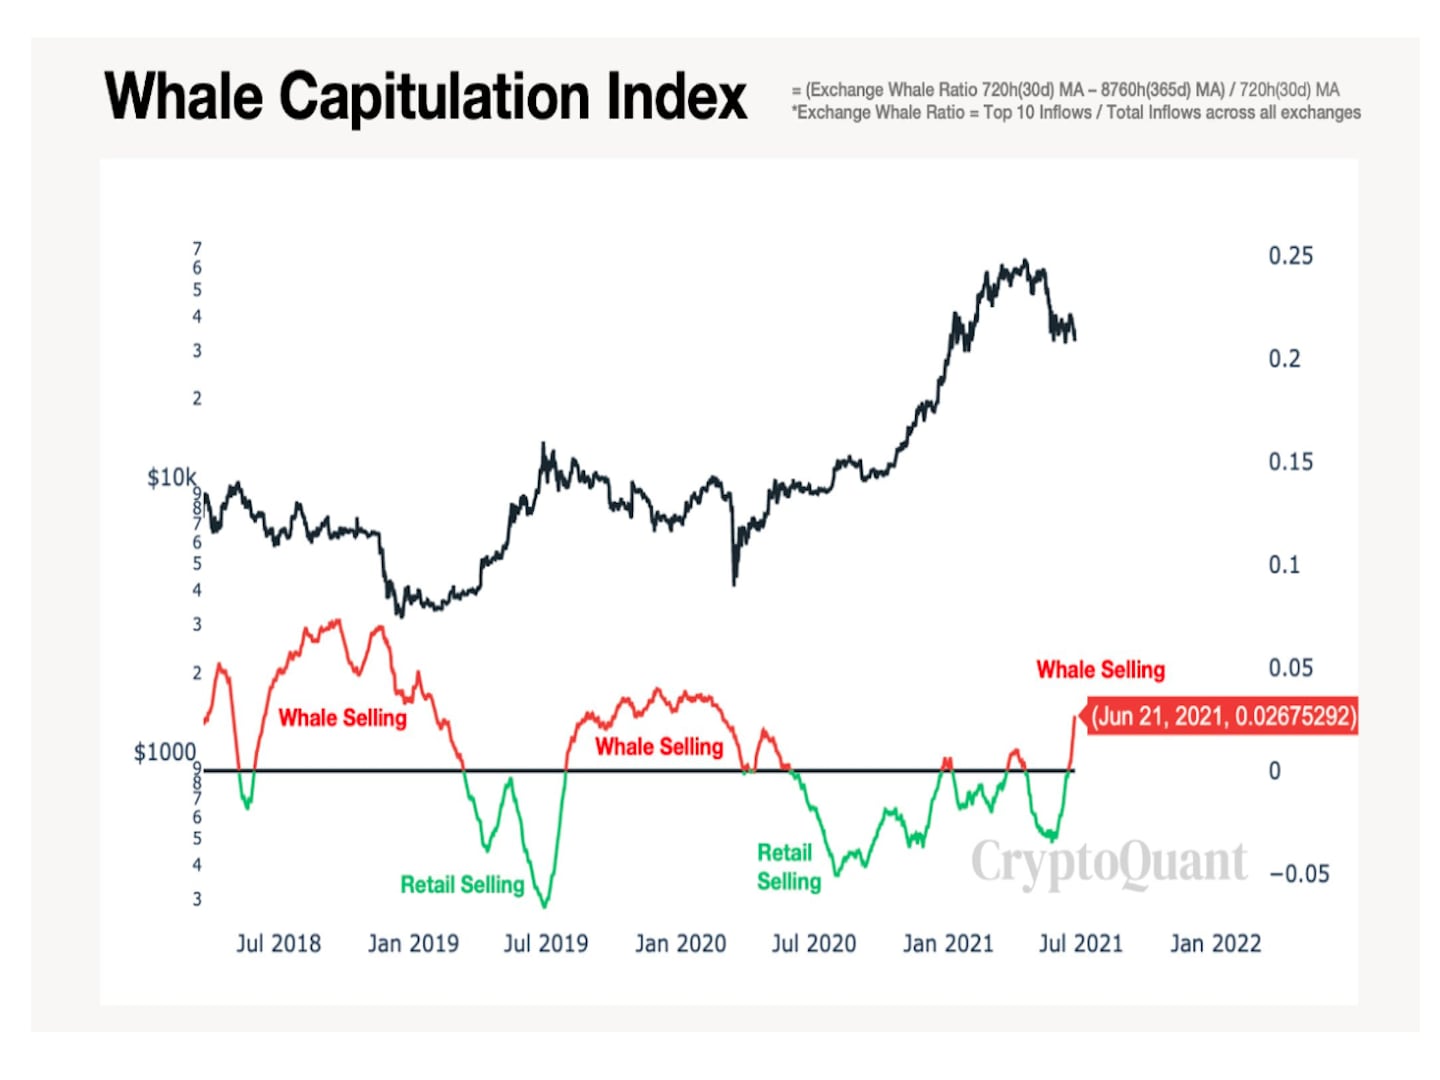 Bitcoin whale capitulation index